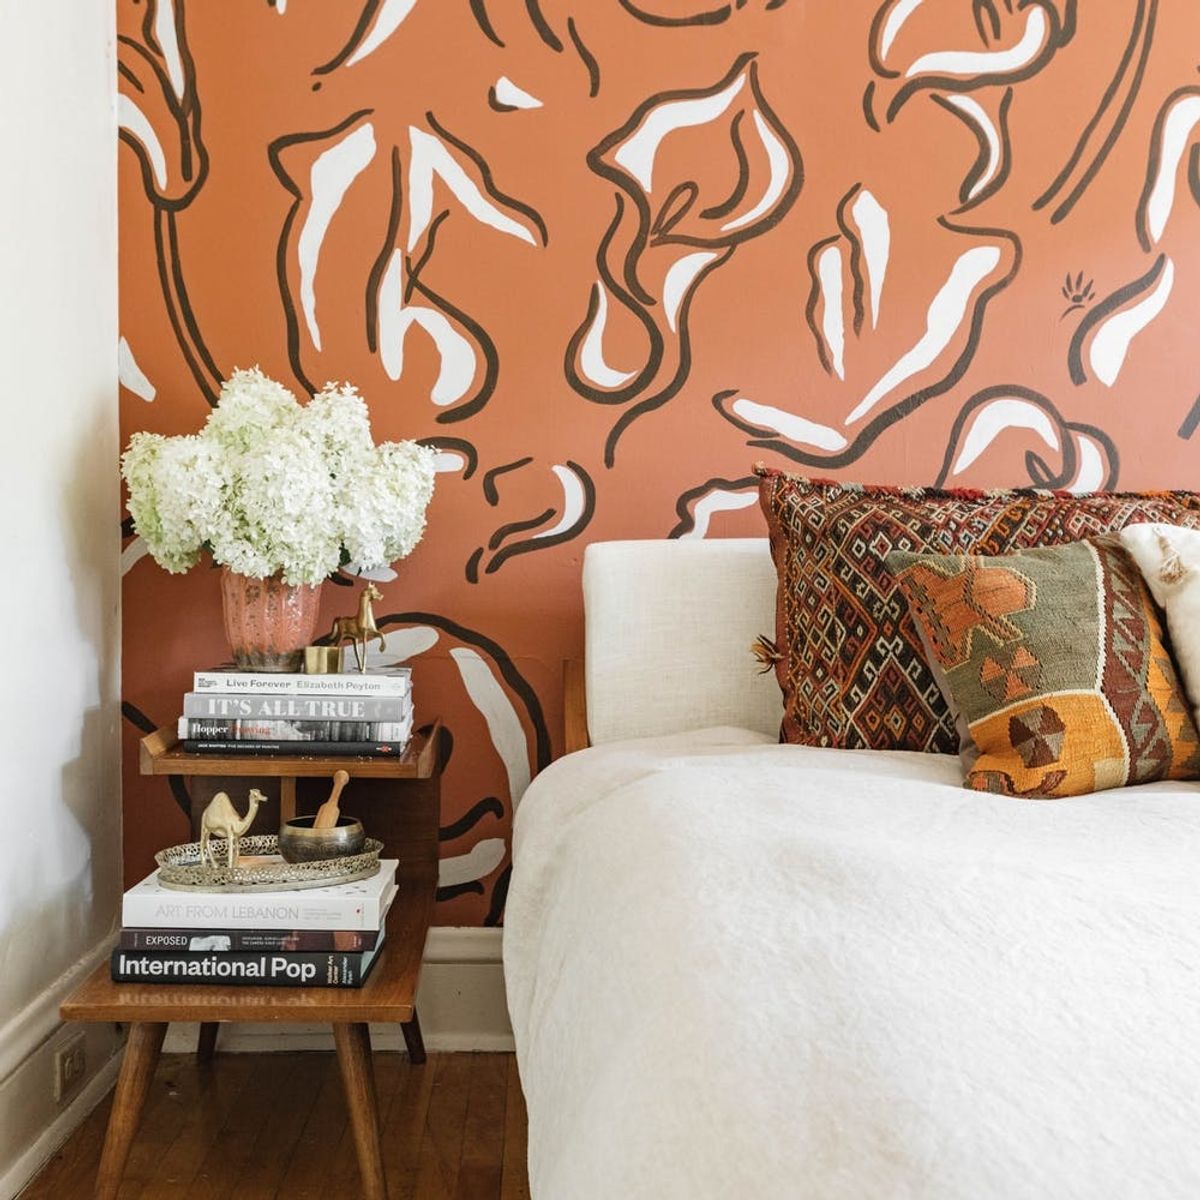 This Room Makeover Will Make You Rethink Murals for 2019